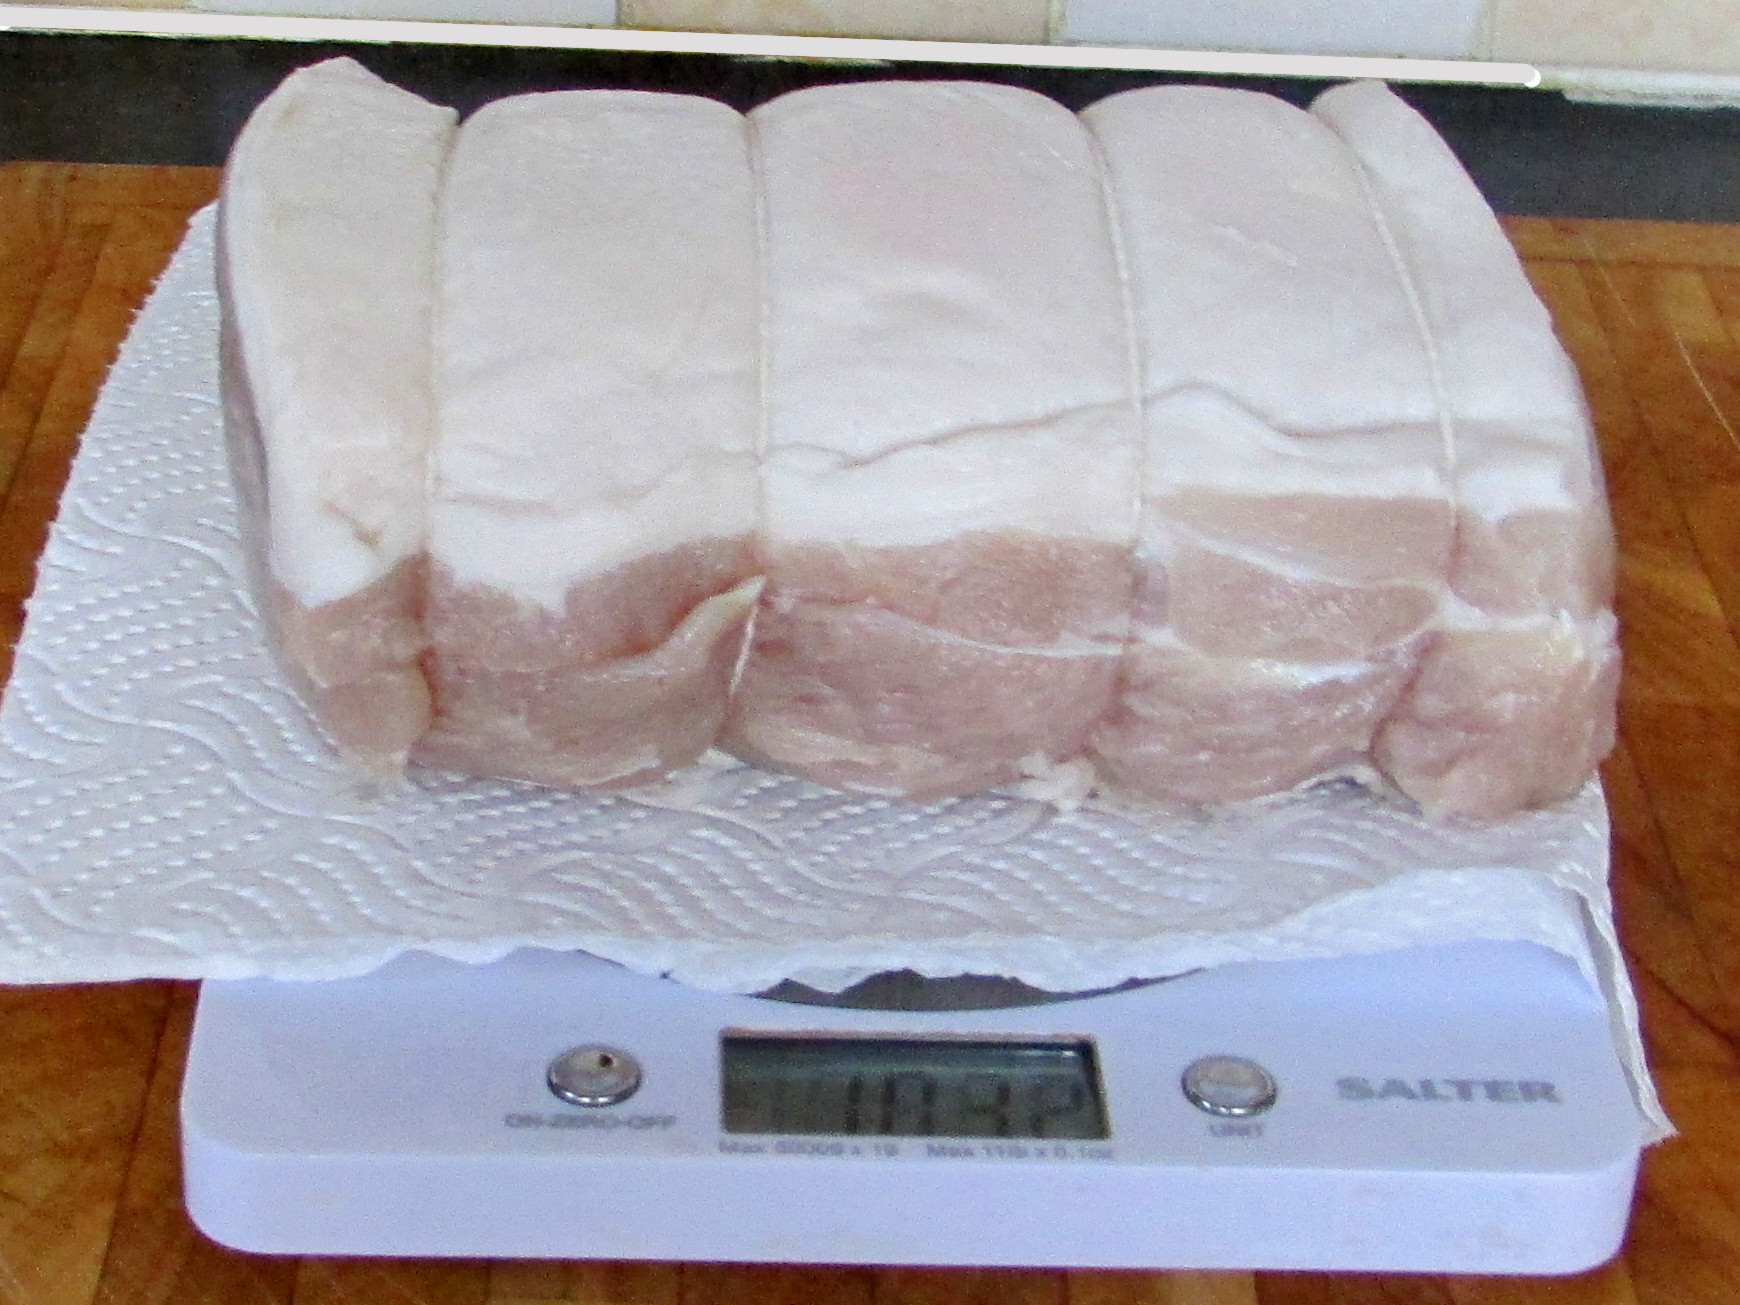 Pork loin after curing